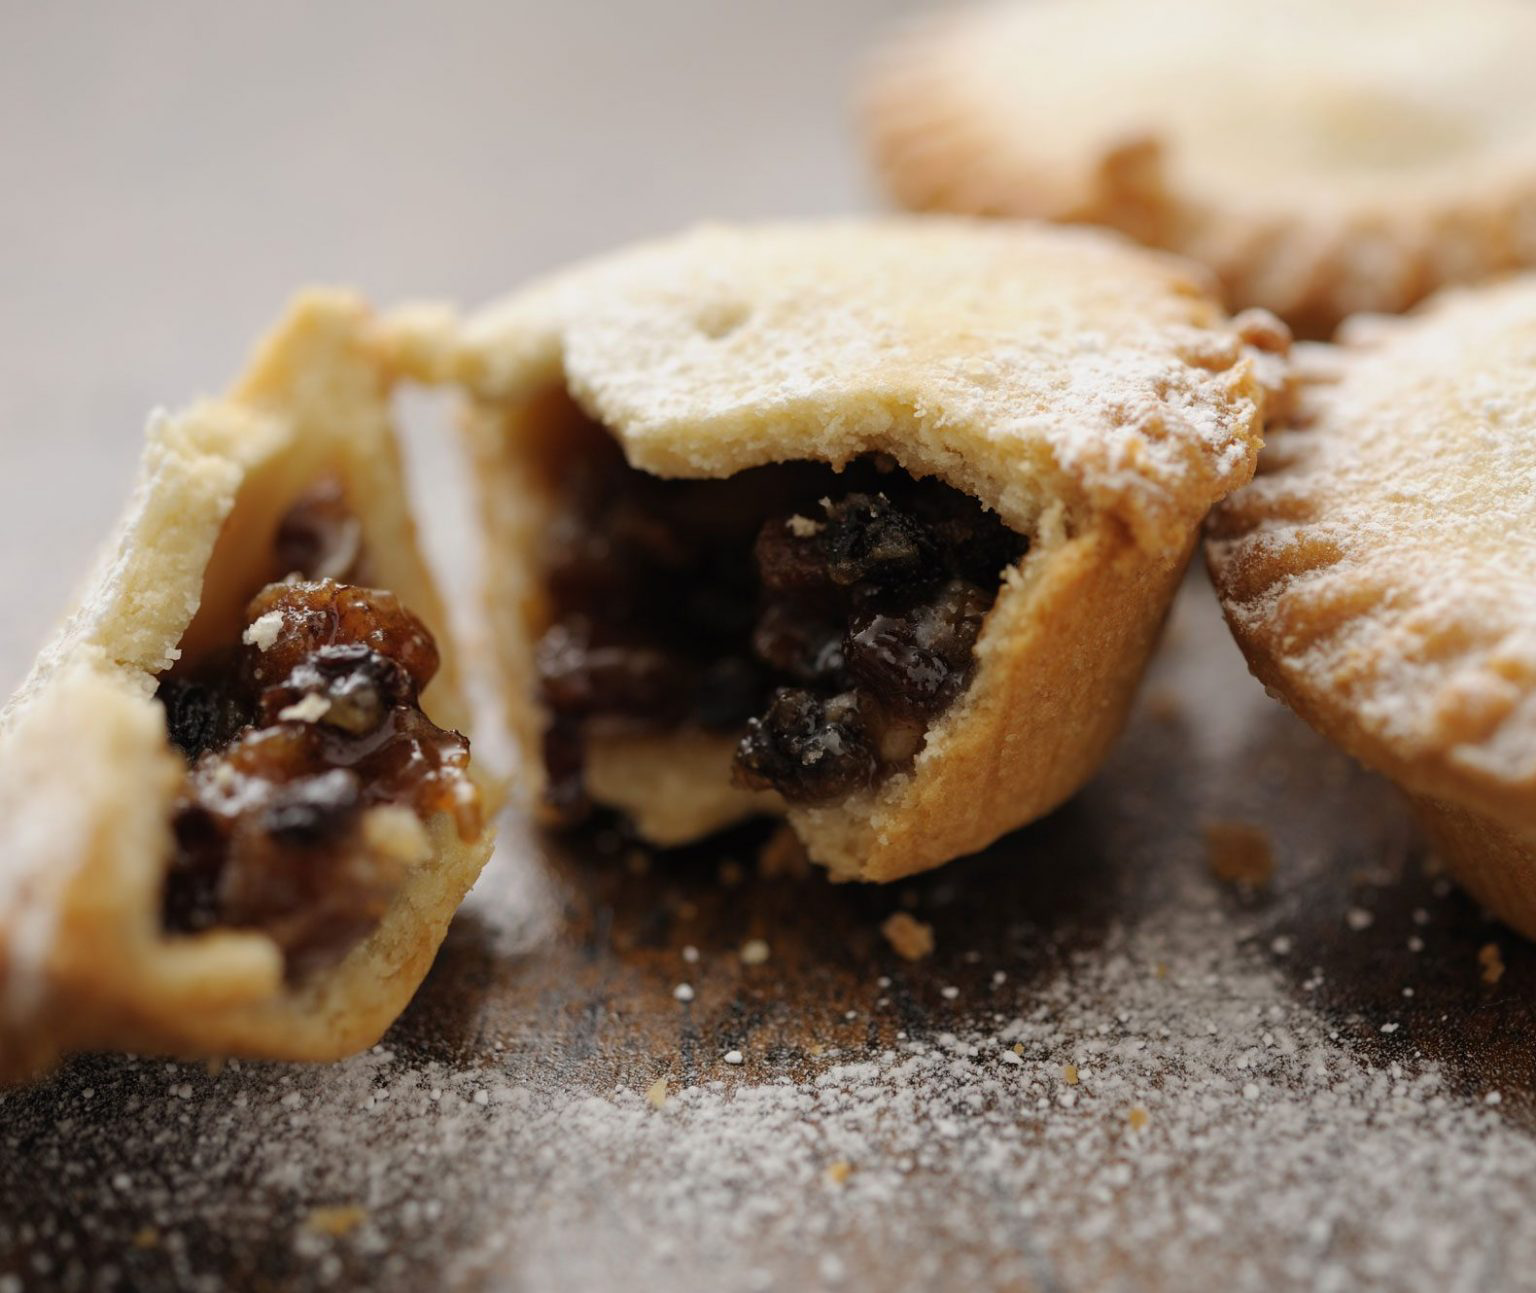 A mince pie broken apart to show its inside.